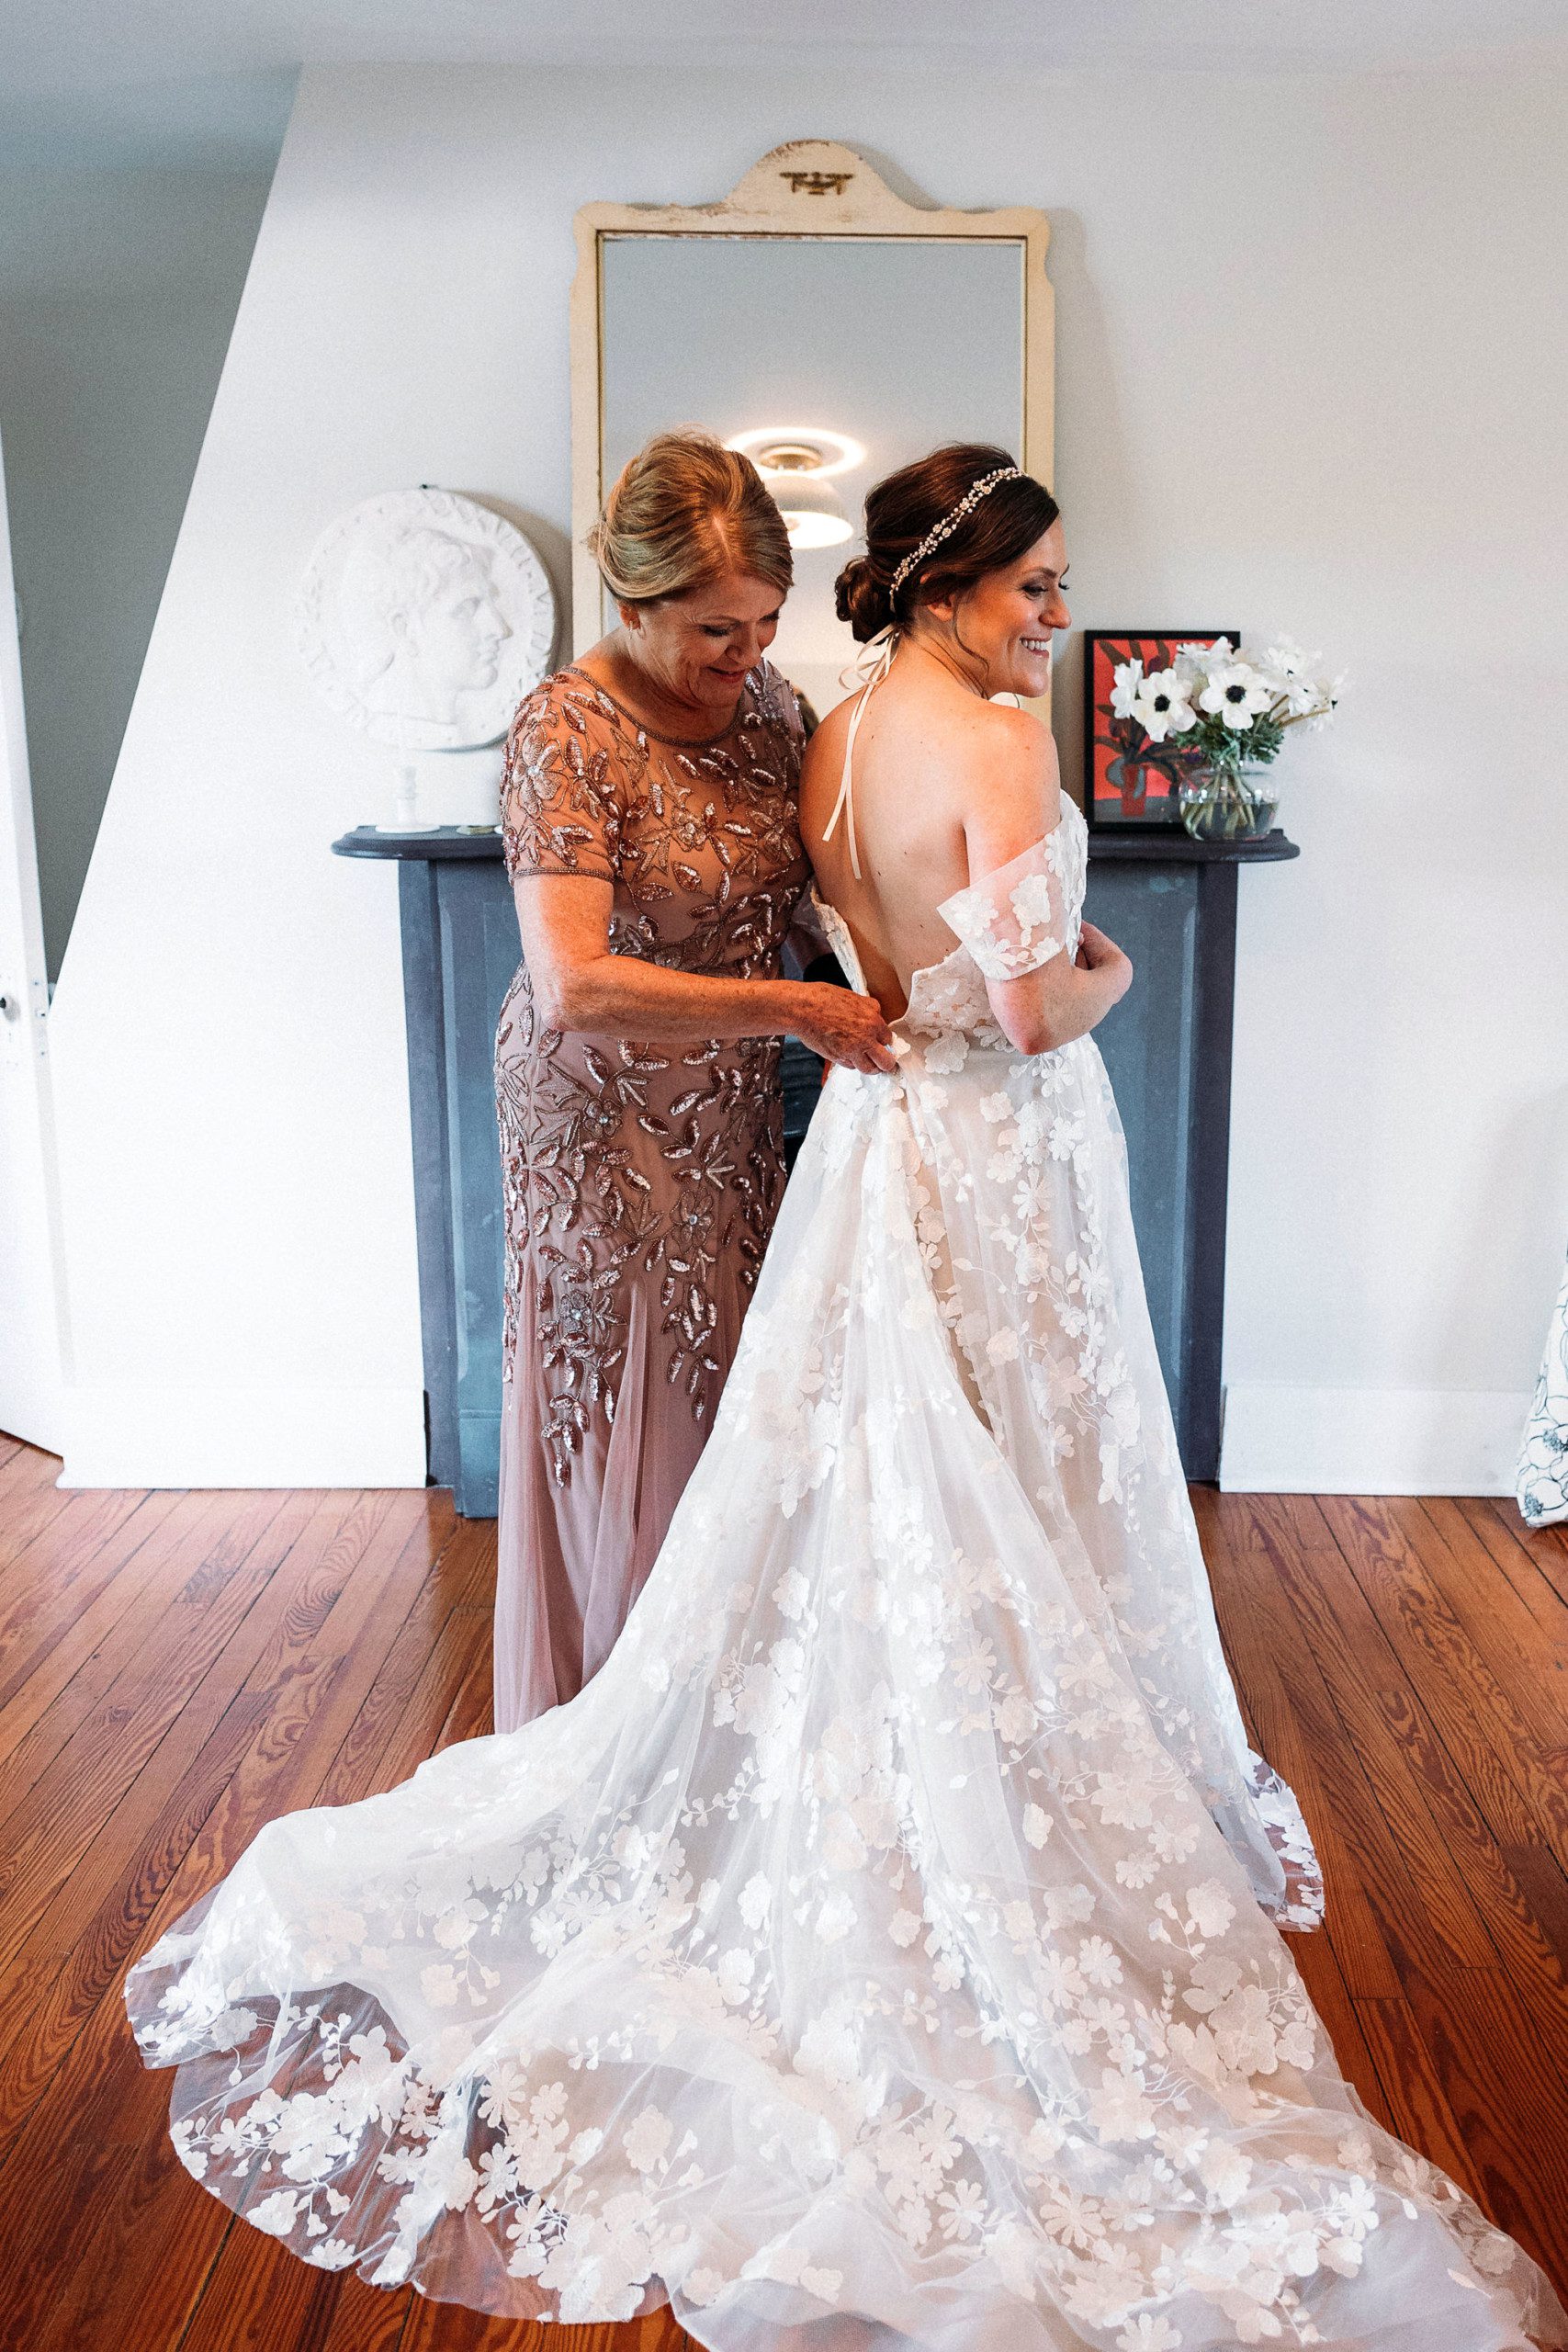 mother helping daughter with wedding dress